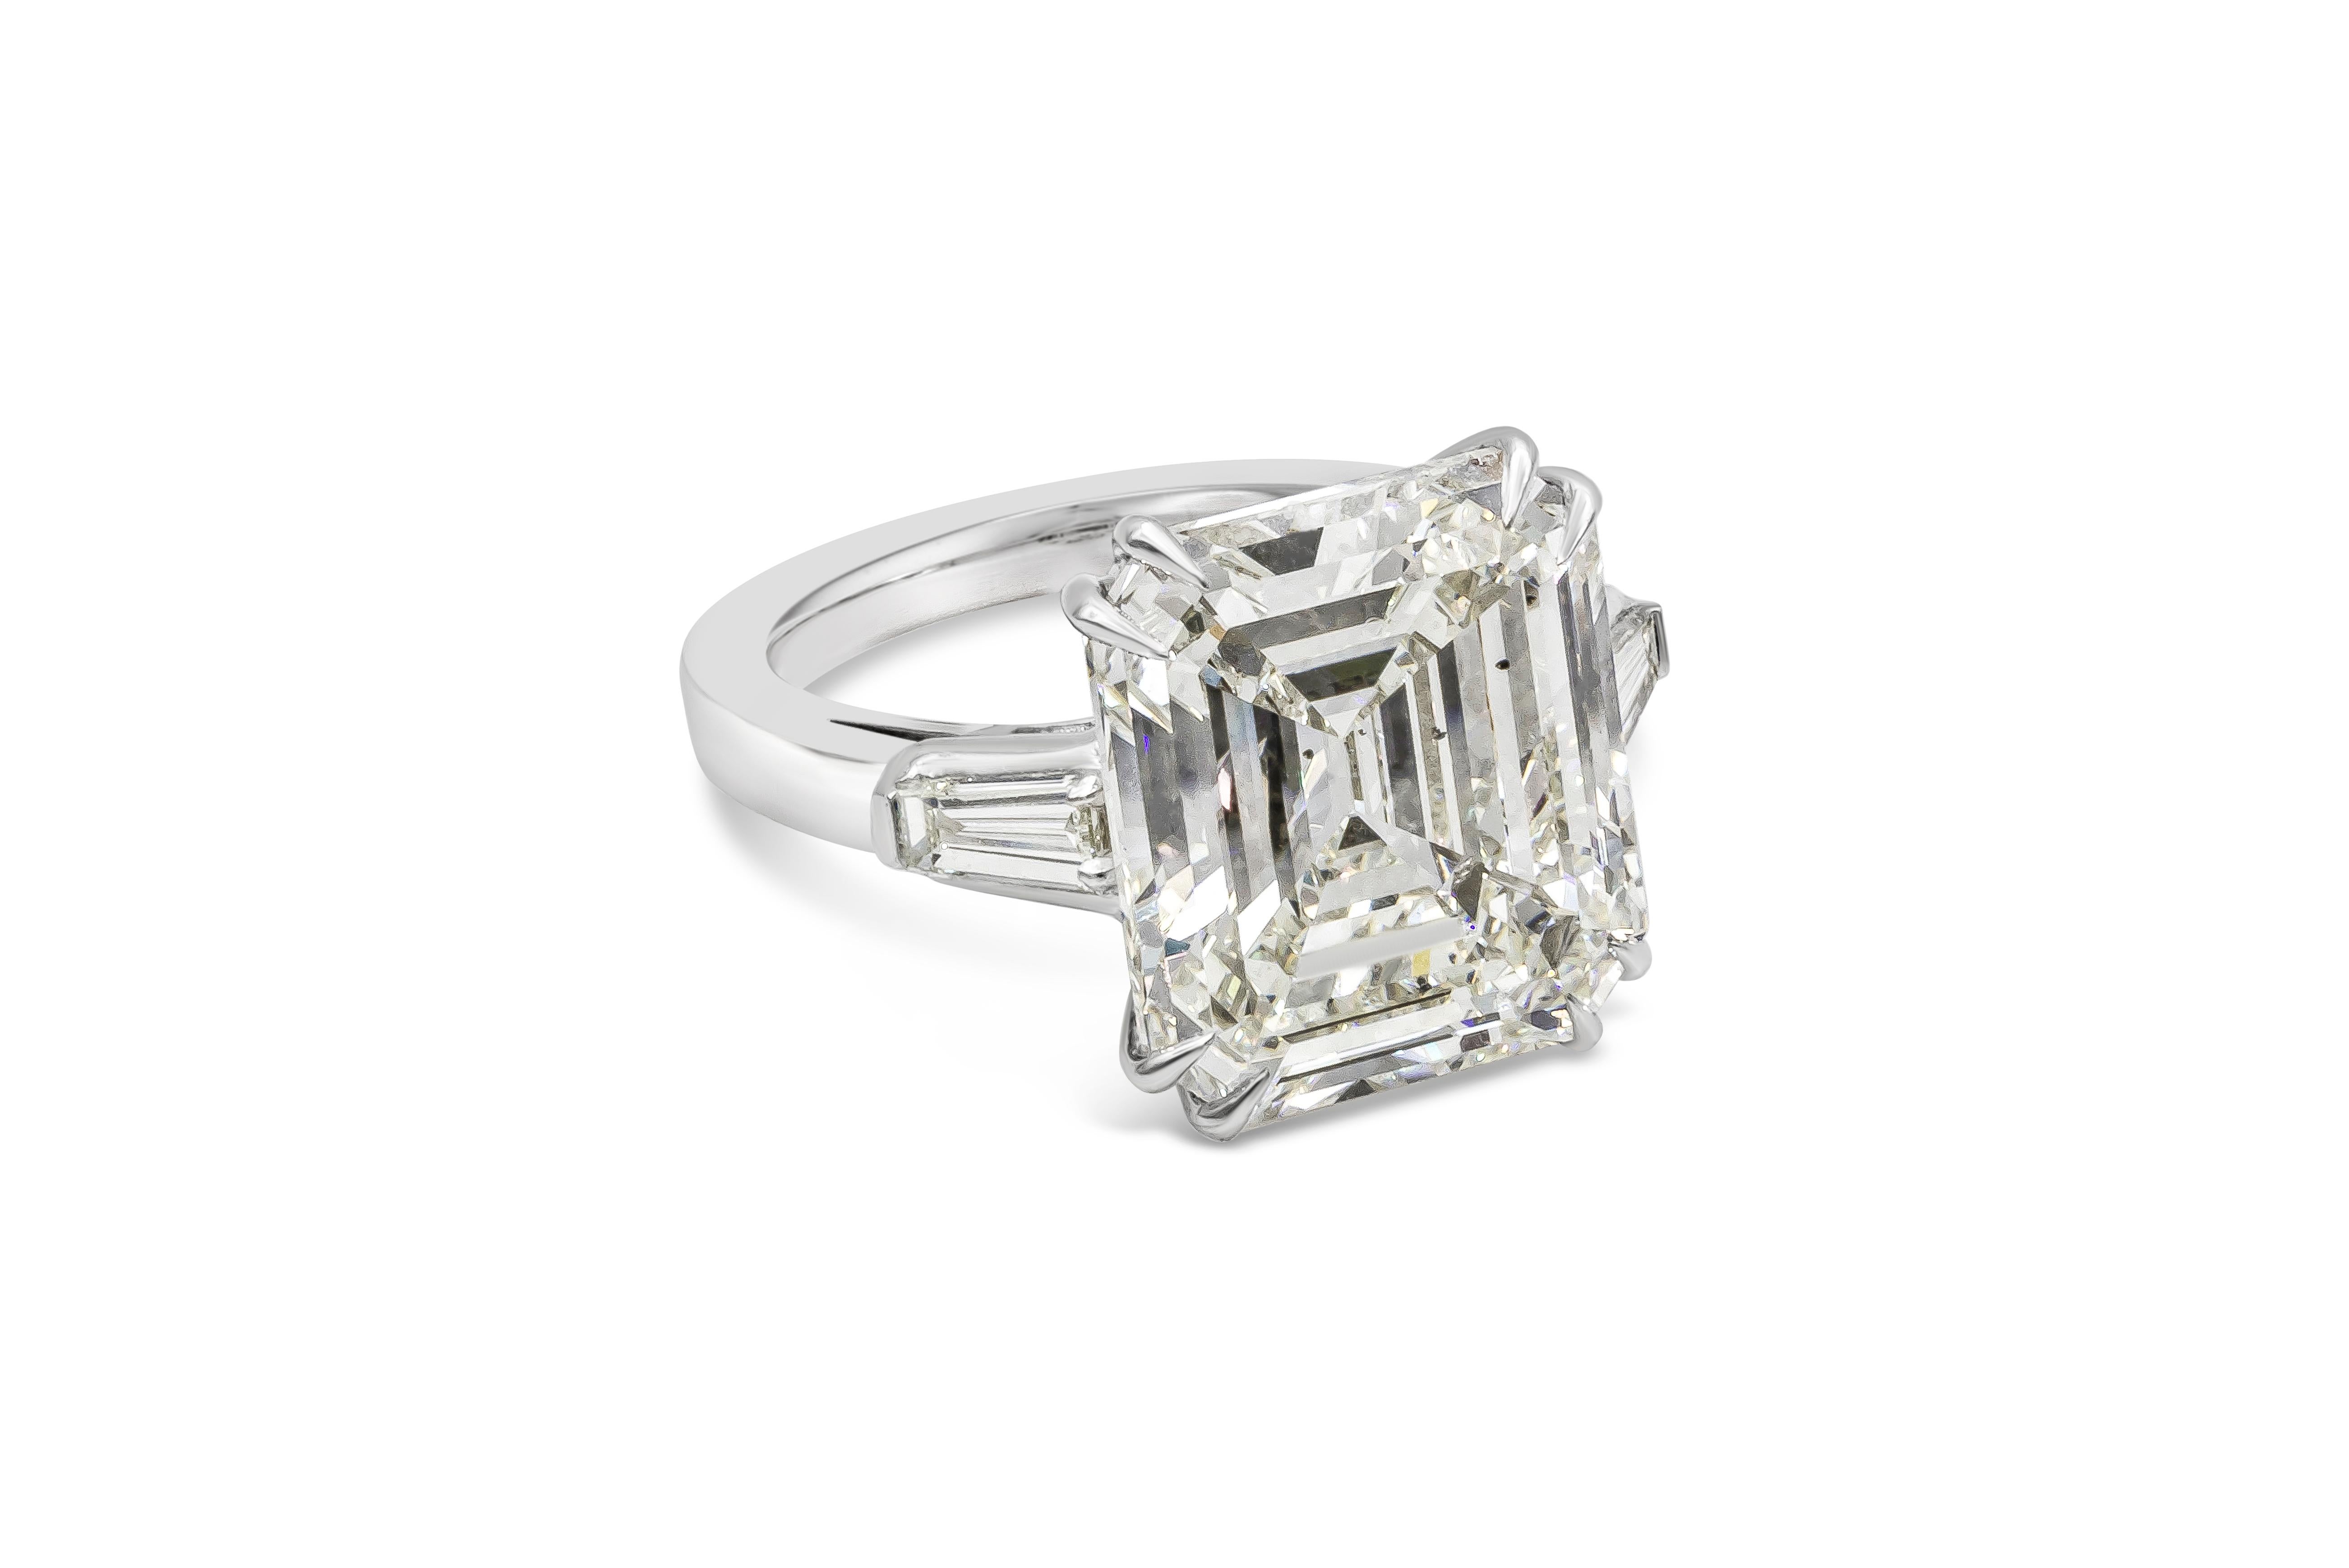 An amazing and classic engagement ring showcasing a GIA Certified 12.55 carats emerald cut diamond, K Color and SI2 in Clarity. Flanked by tapered baguette diamonds on each side weighing 0.50 carat total. Made with Platinum. Size 6.5 US and